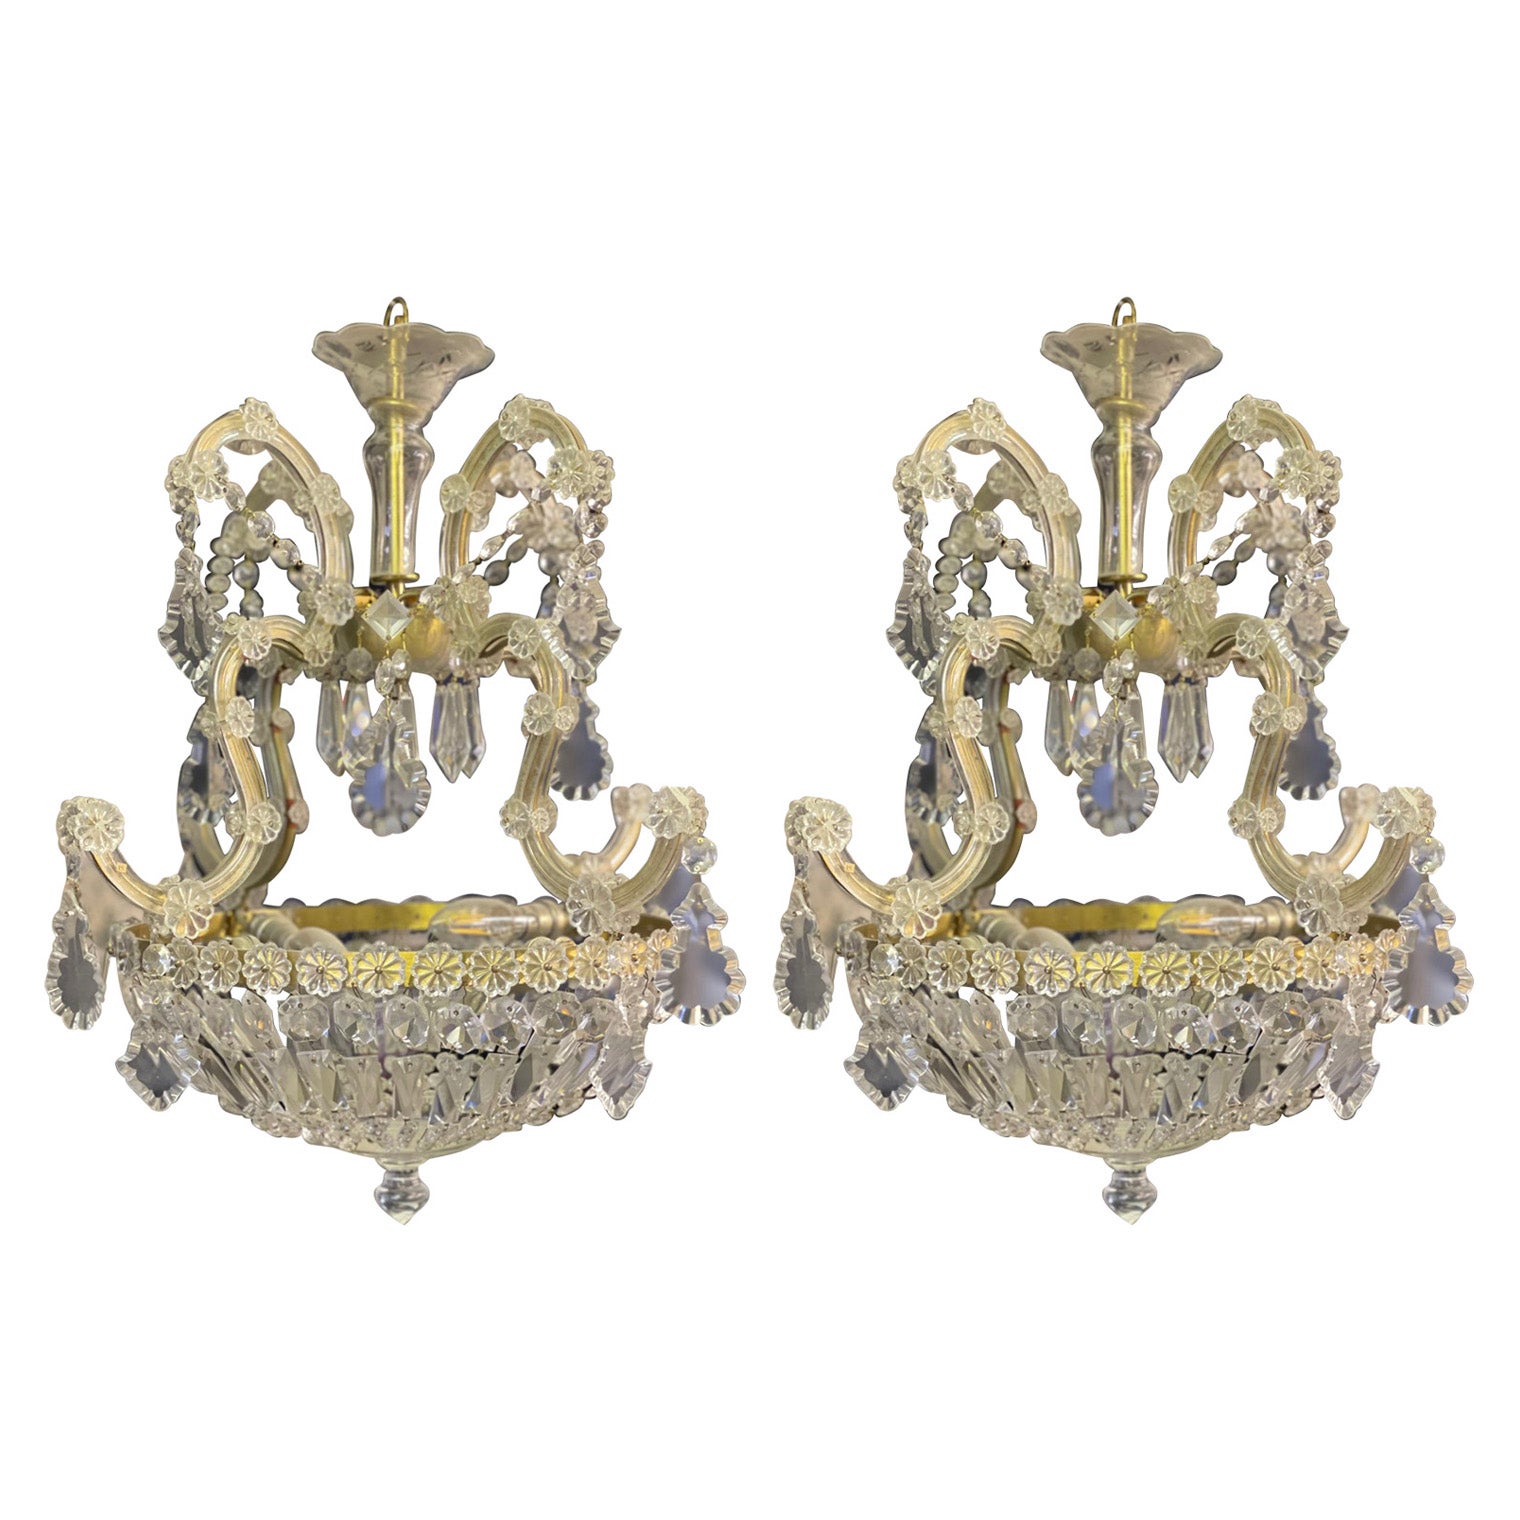 Very Elegent Pair of 20th Century Bag and Tent Style Marie Therese Chandeliers